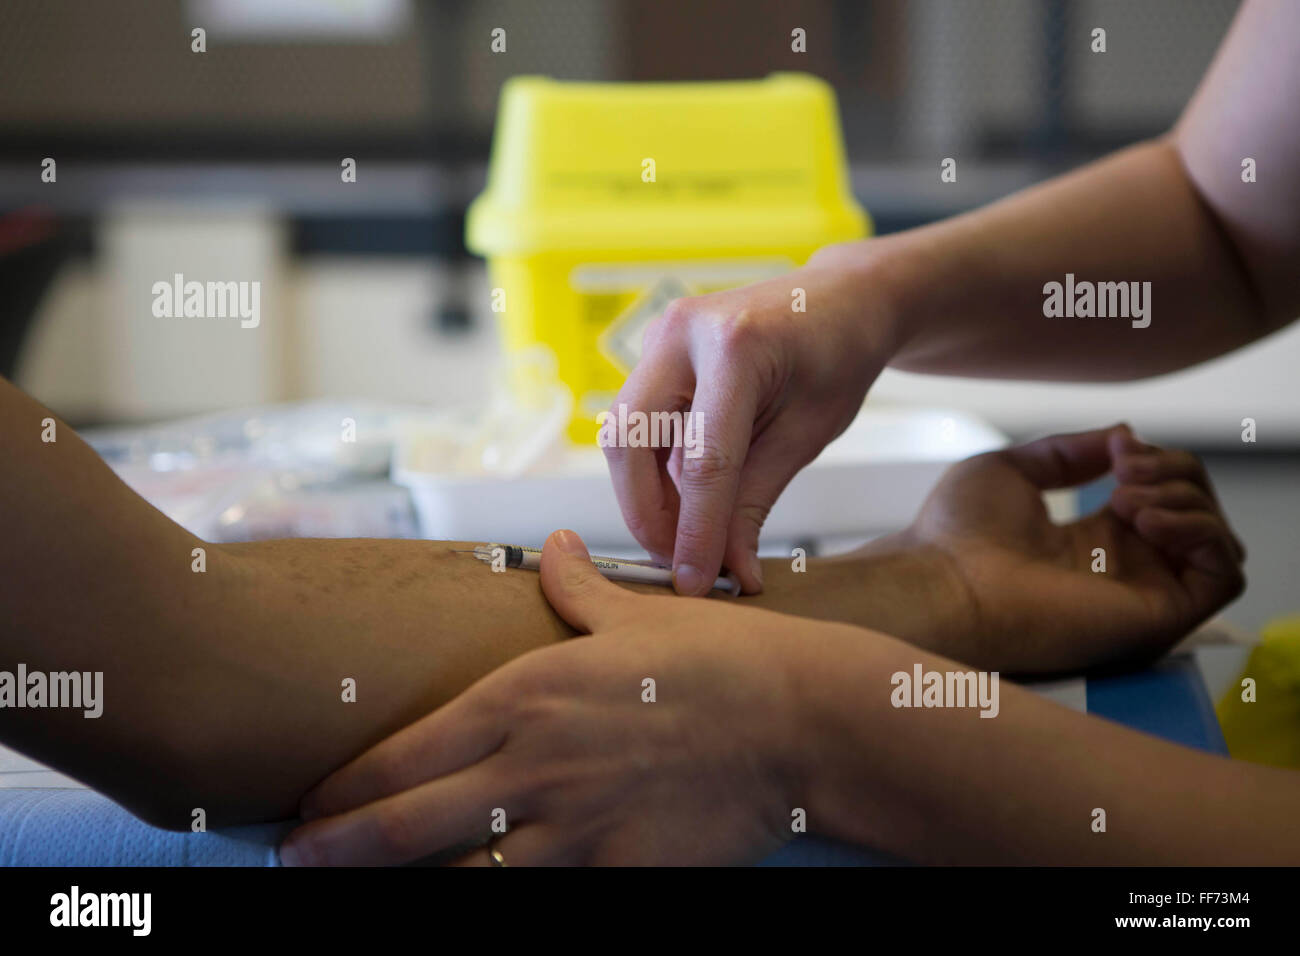 Sarah Murphy, TB Nurse Specialist, performs an intra-dermal injection of the Mantoux PPD skin test on a young person’s forearm to screen for Latent TB infection. London, UK. Stock Photo